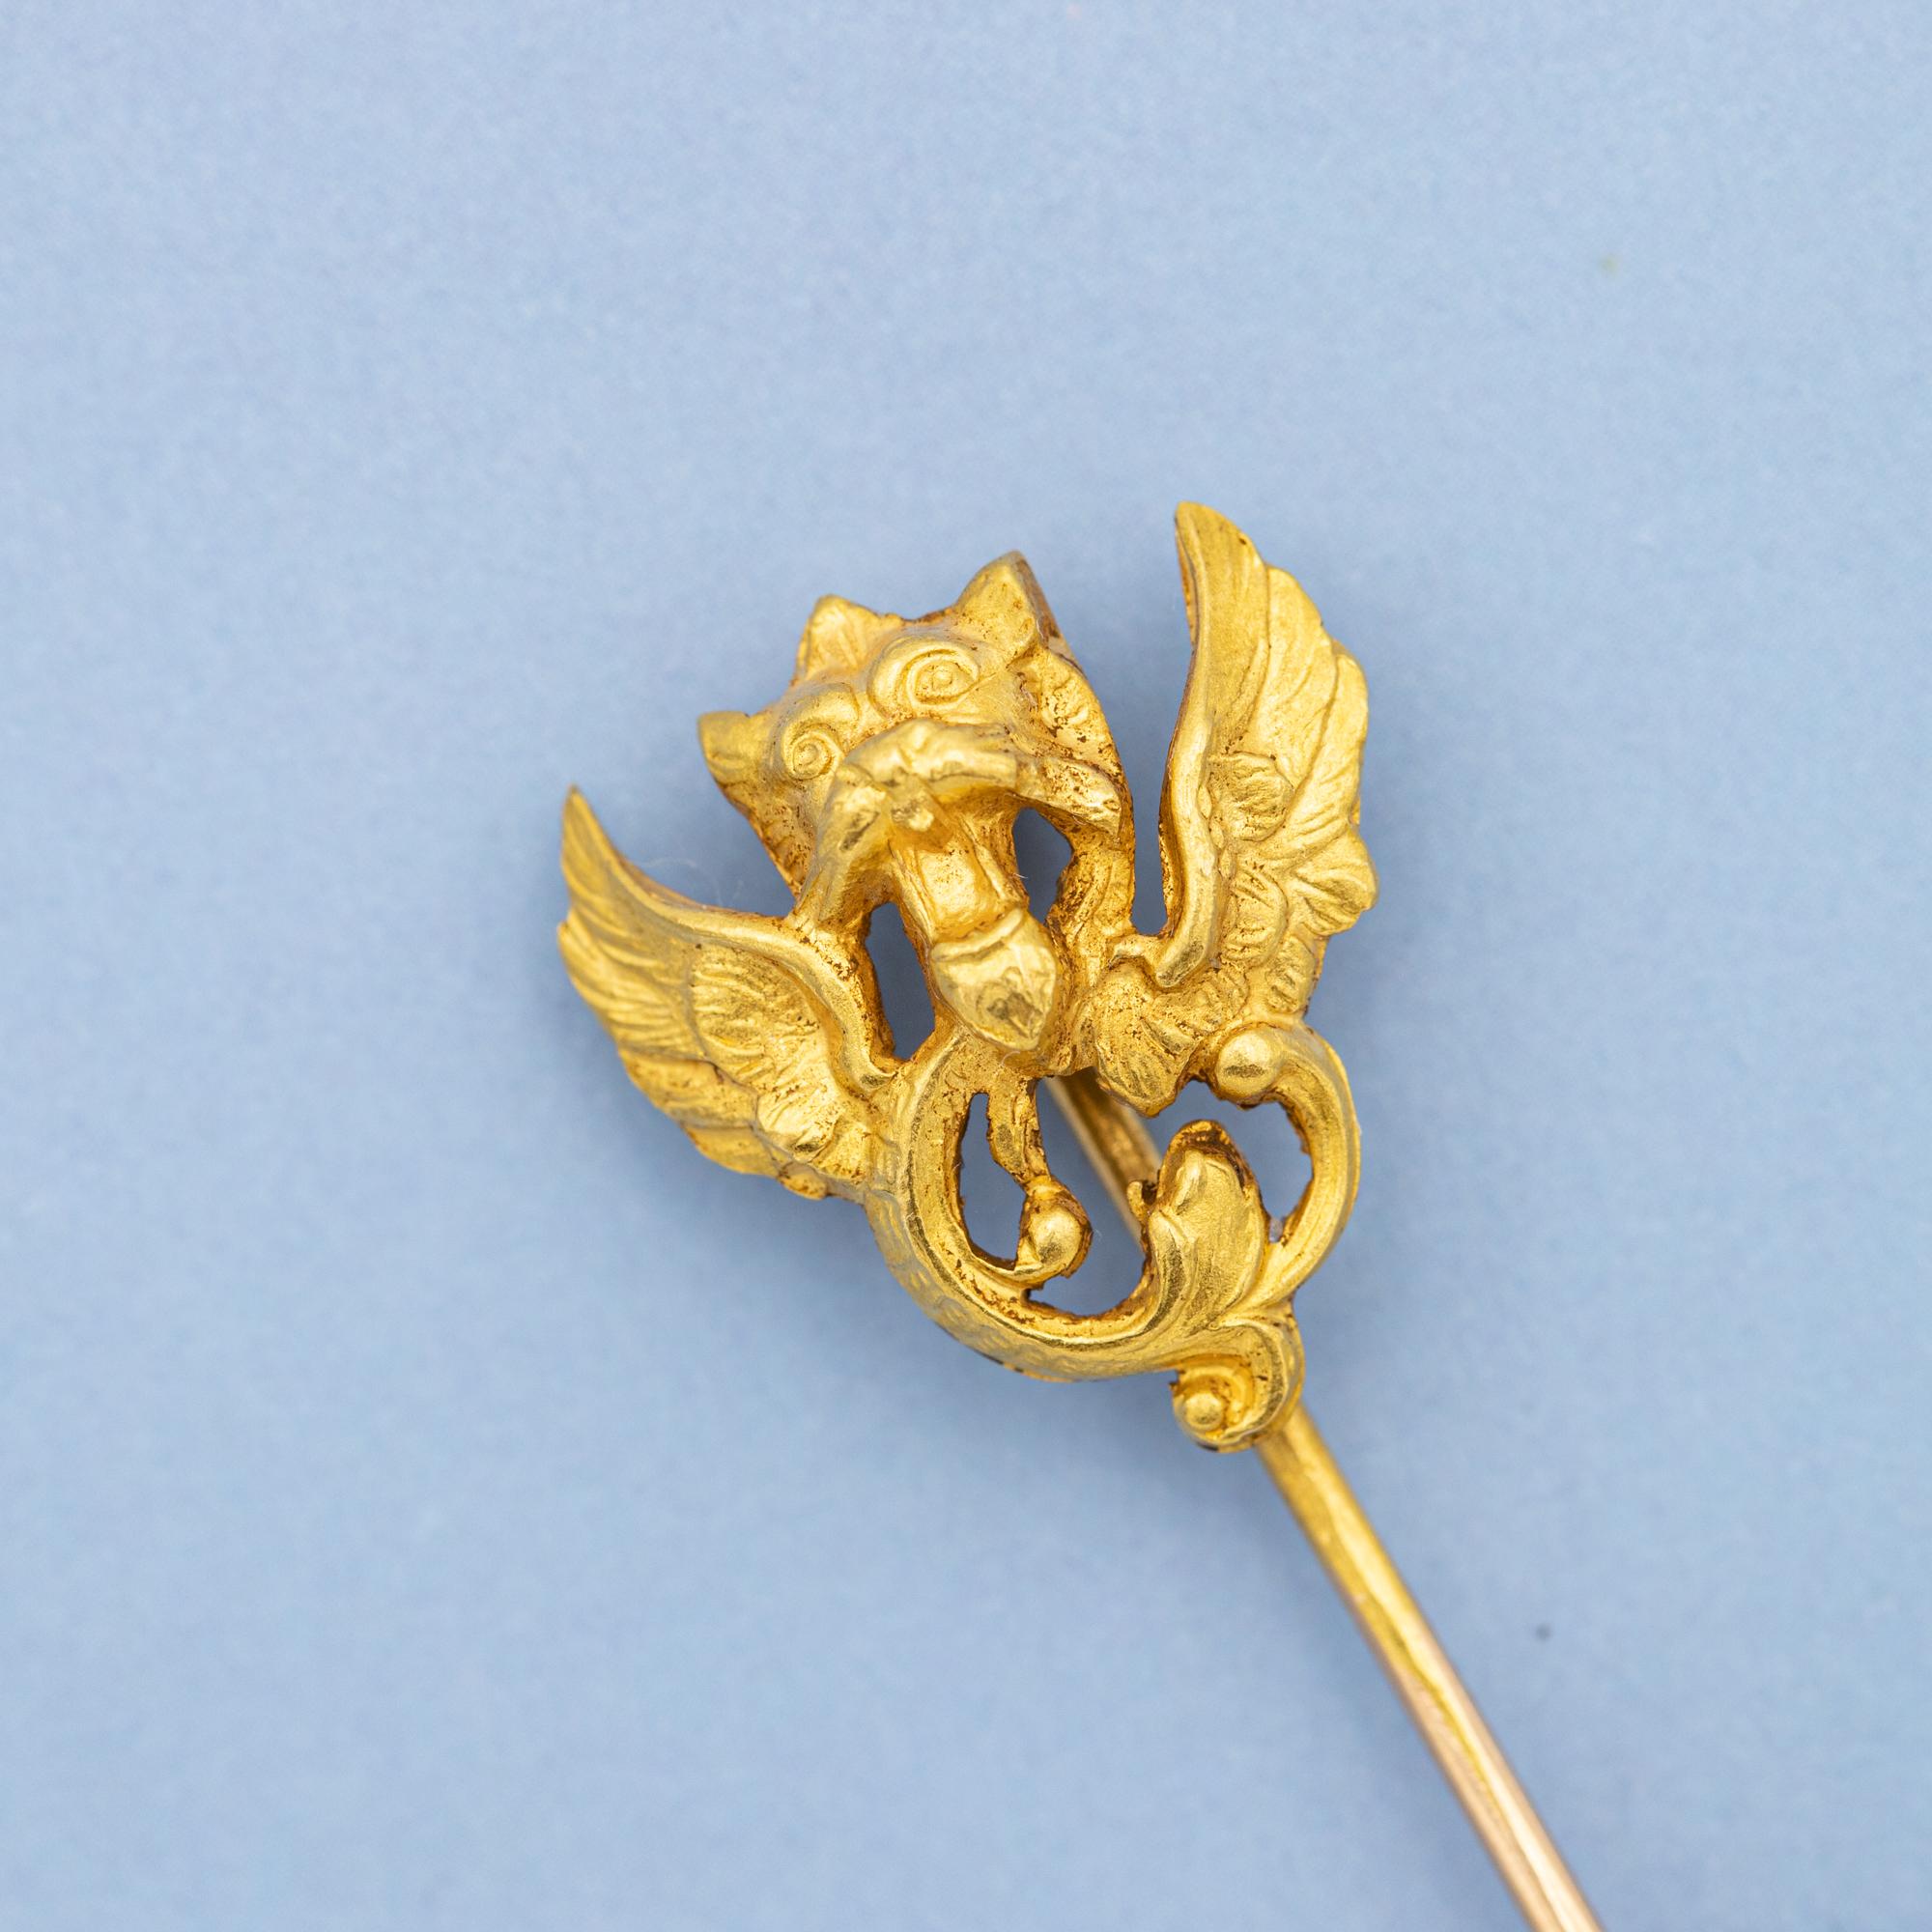 18k Yellow gold stick pin - Griffin brooch - Antique French Dragon cravat pin For Sale 3